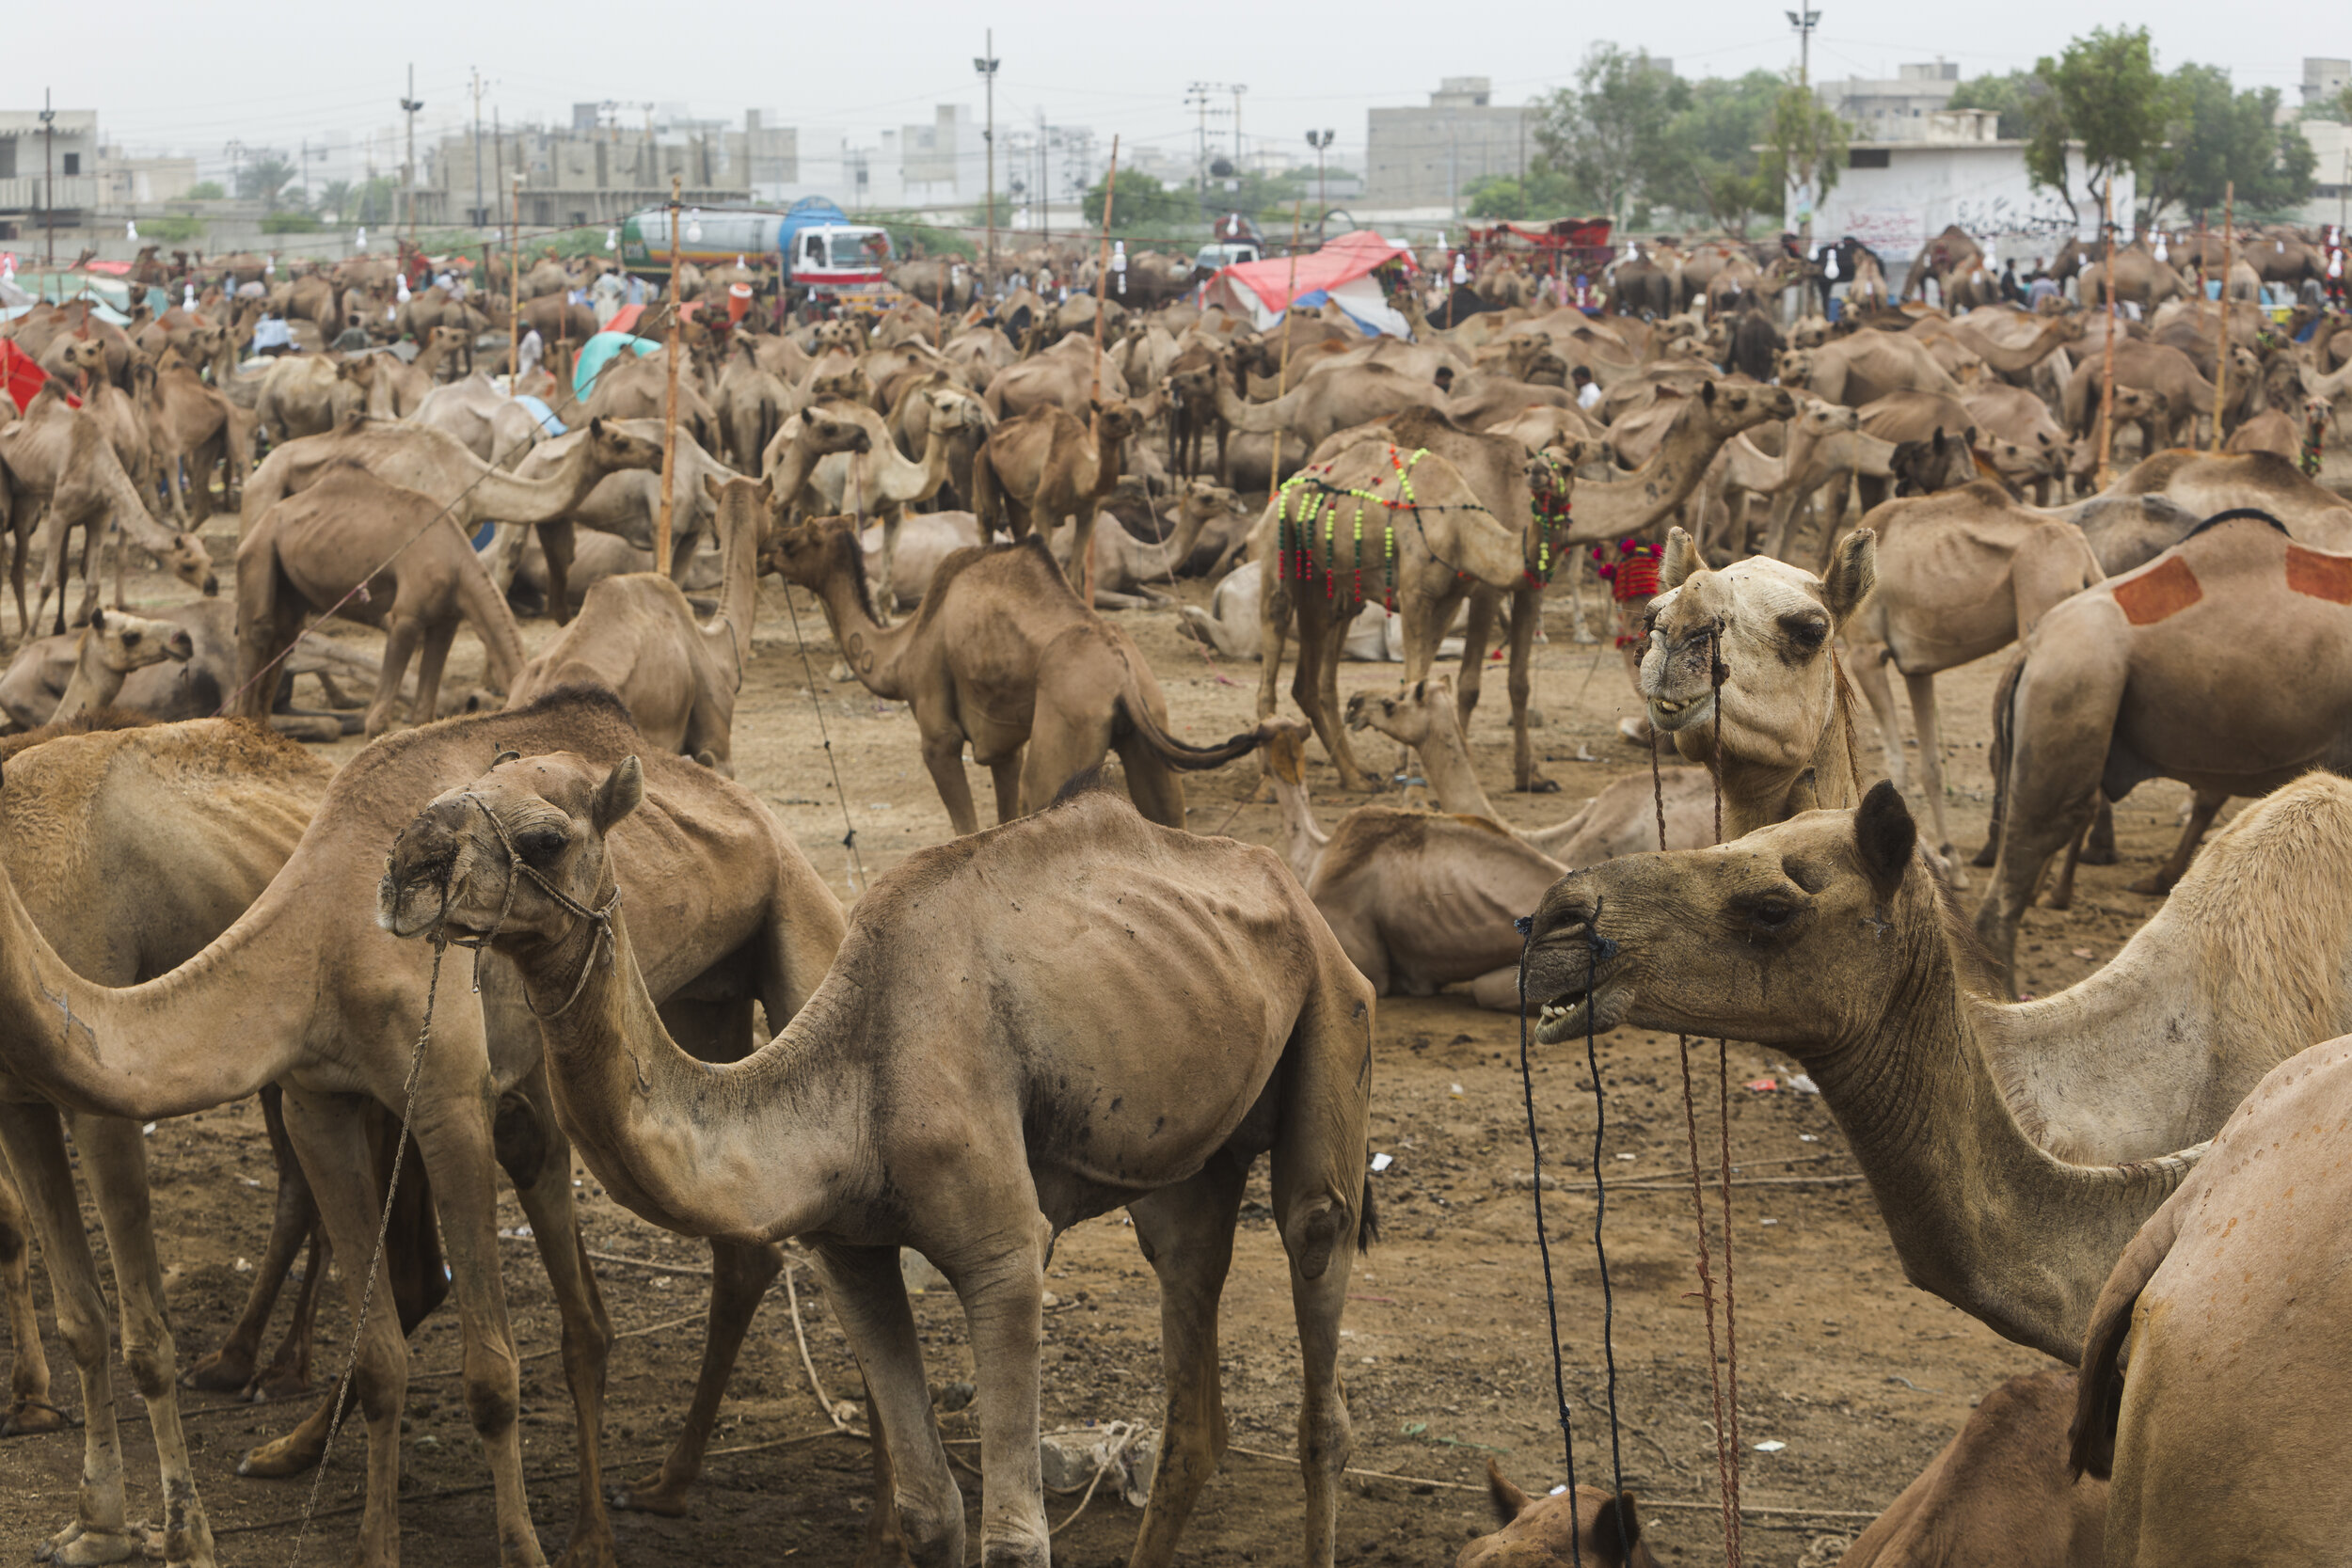  A camel market, or 'mandi,' in Karachi, Pakistan on Friday Aug 9, 2019. Mandis are pop up animal markets where customers browse and purchase goats, sheep, cows, or camels for ritual slaughter for the Muslim celebration Eid al-Adha. Much of meat is o